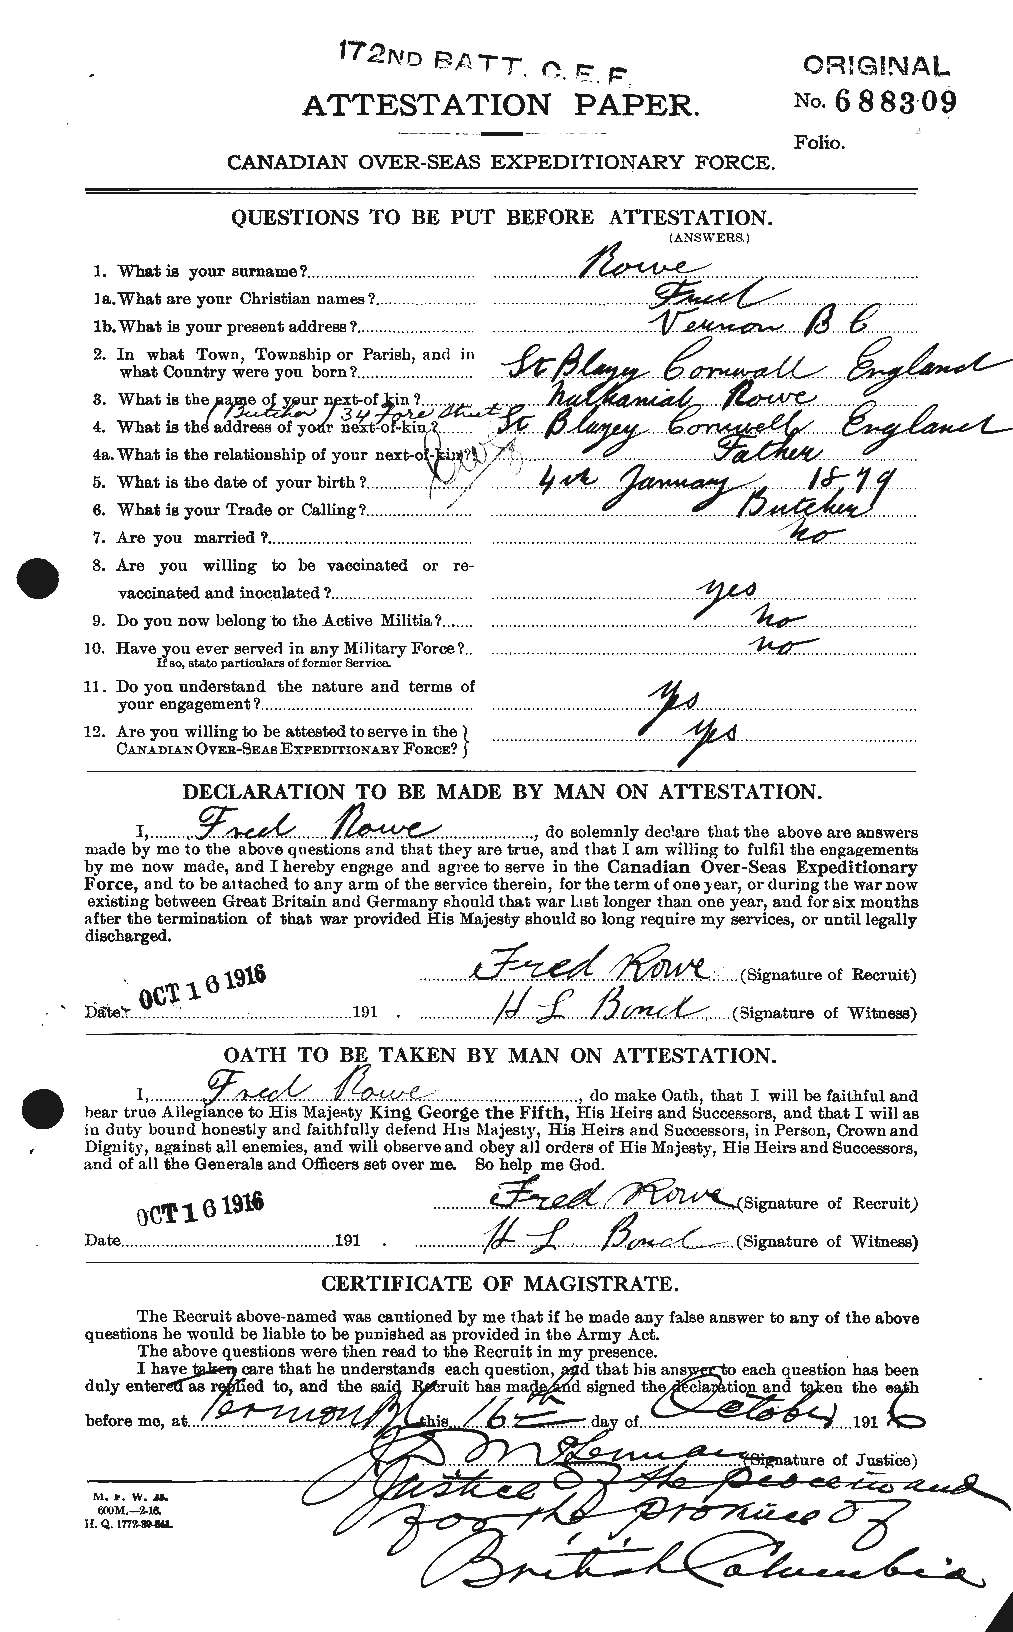 Personnel Records of the First World War - CEF 615861a